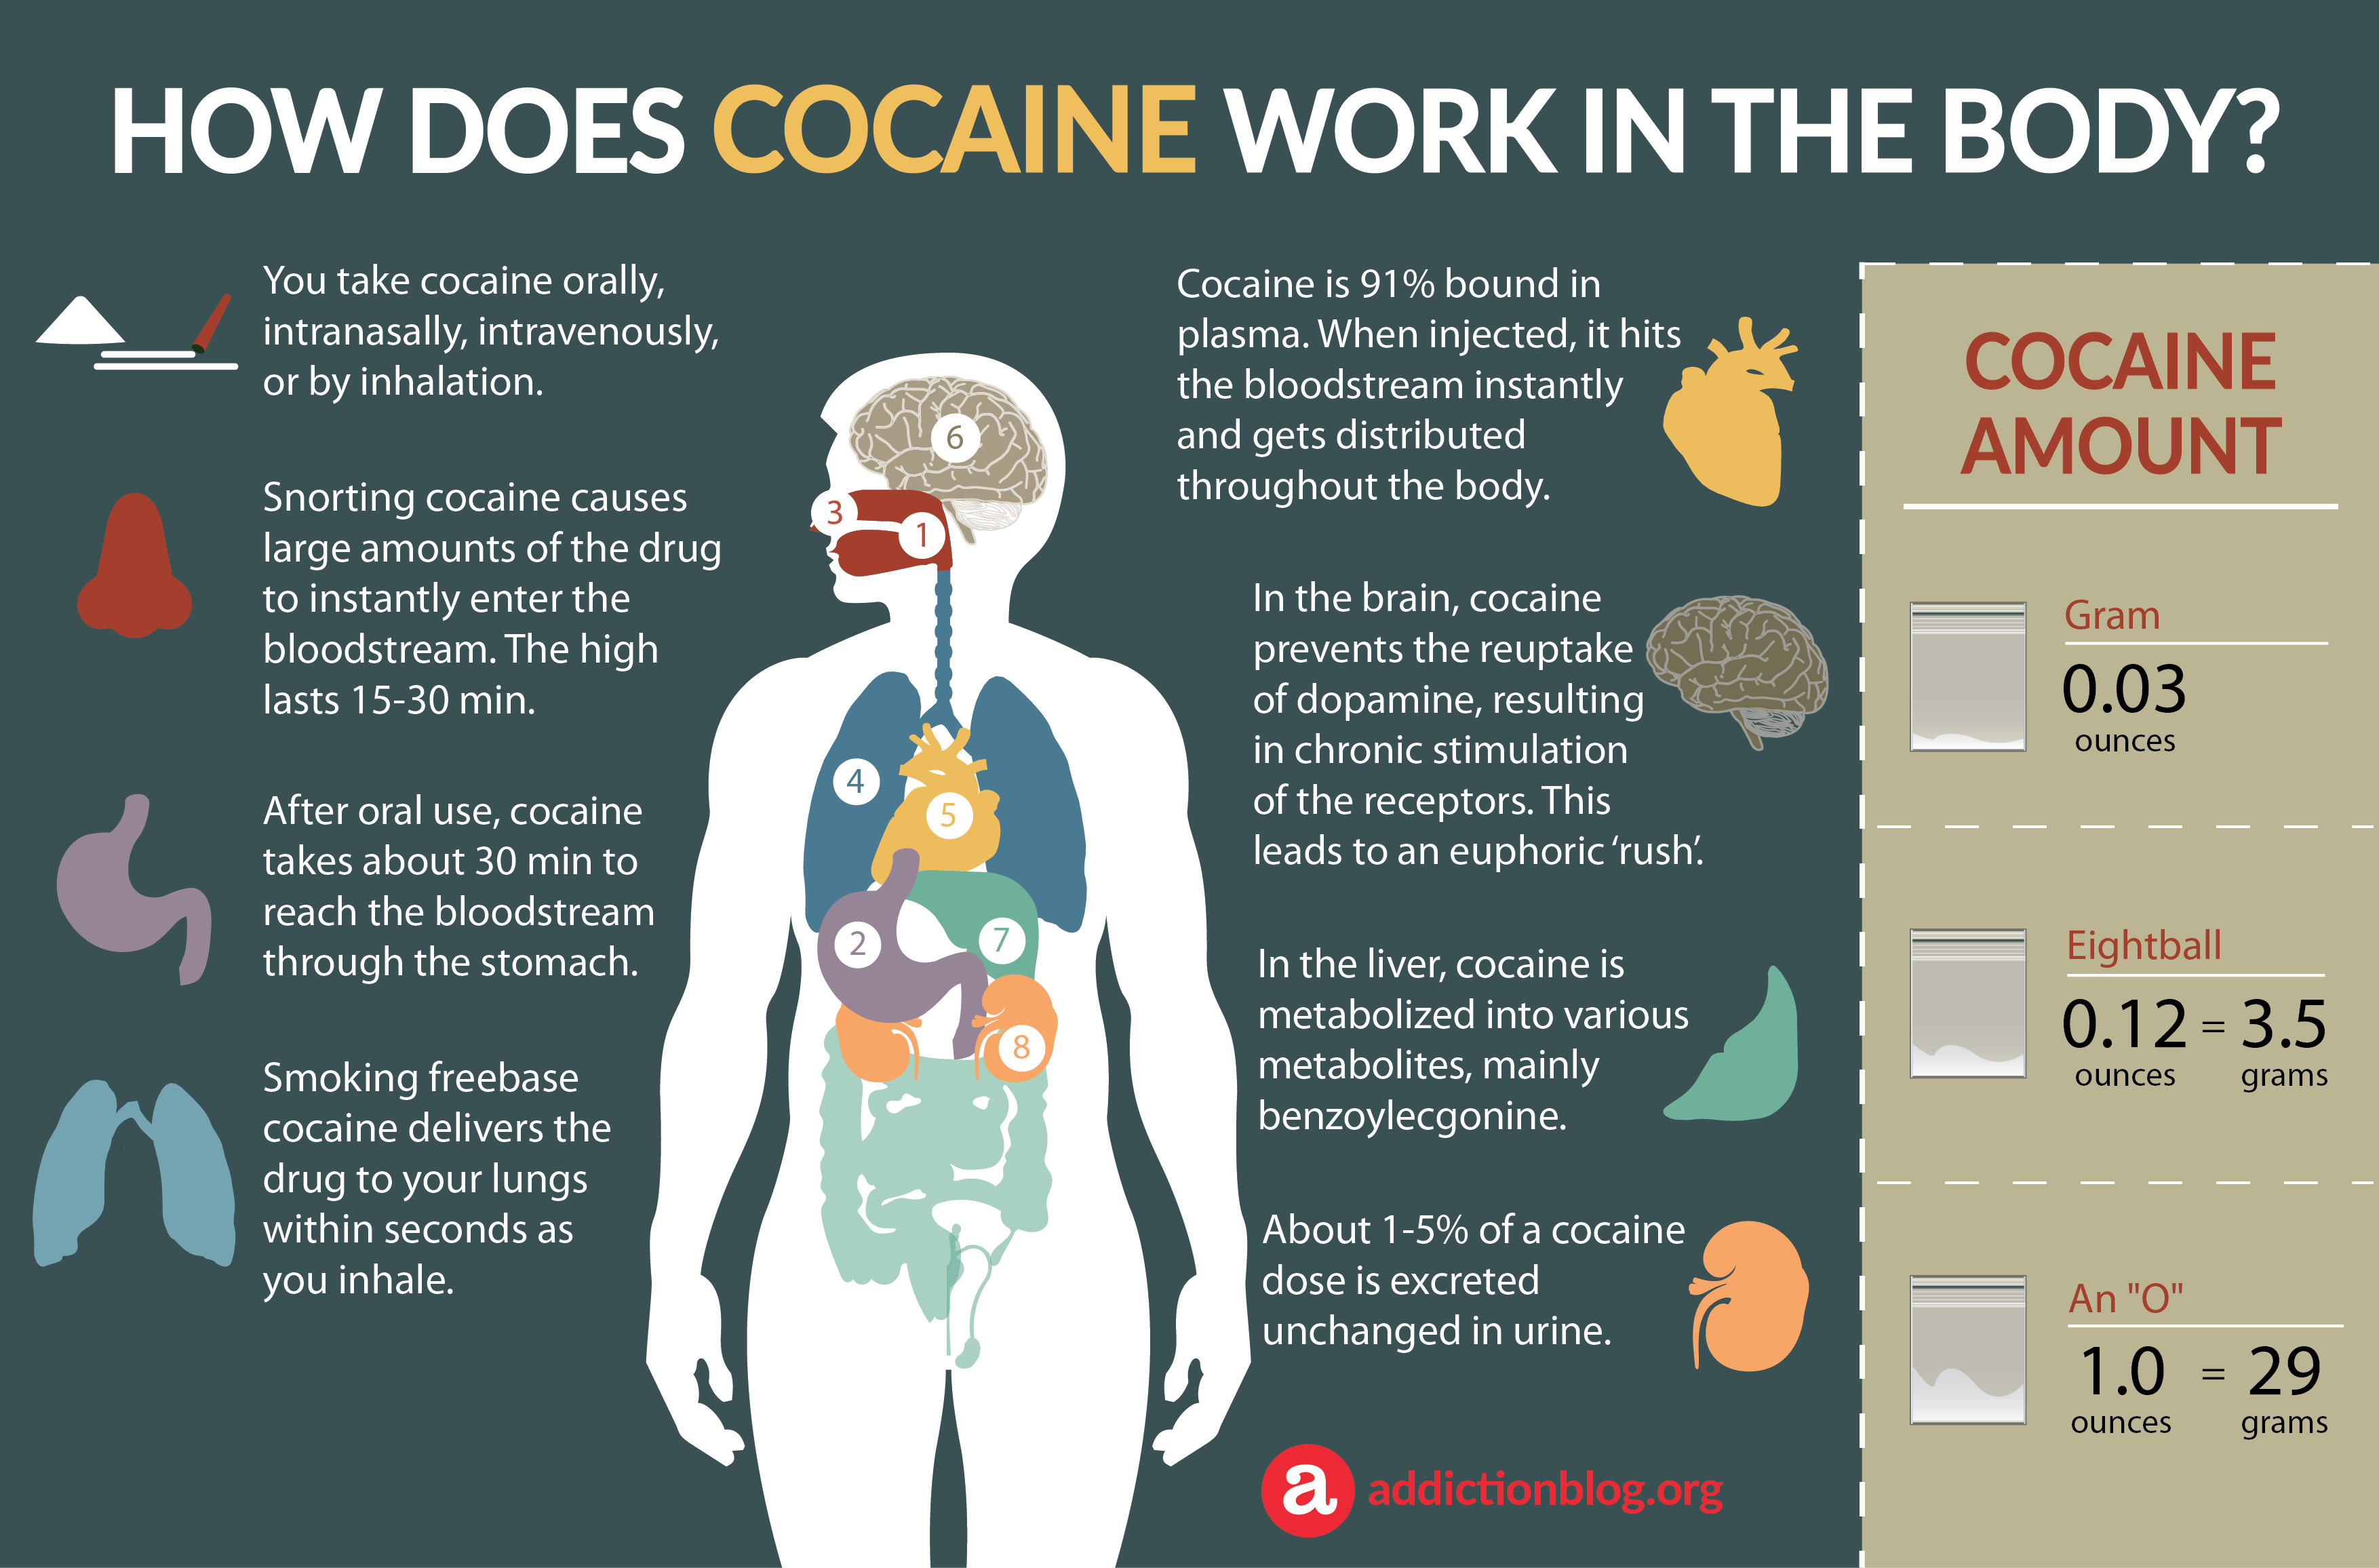 Cocaine Metabolism in the Body: How Coke Affects the Brain (INFOGRAPHIC)